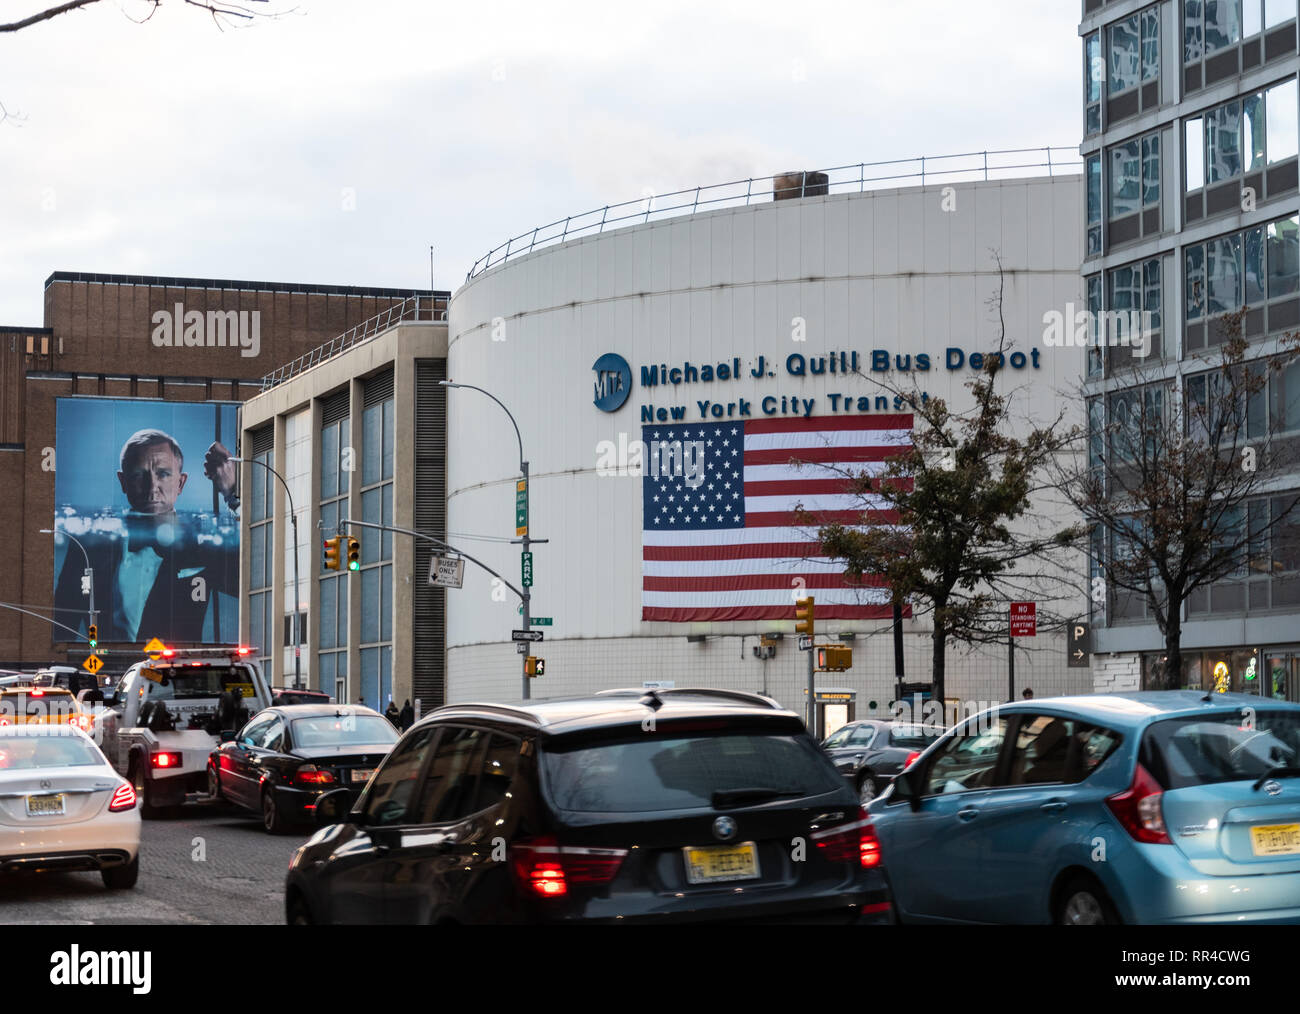 New York City, United States - November 17 2018:   Michael J Quill bus depot of the New York City Transit company on 11th Avenue Stock Photo